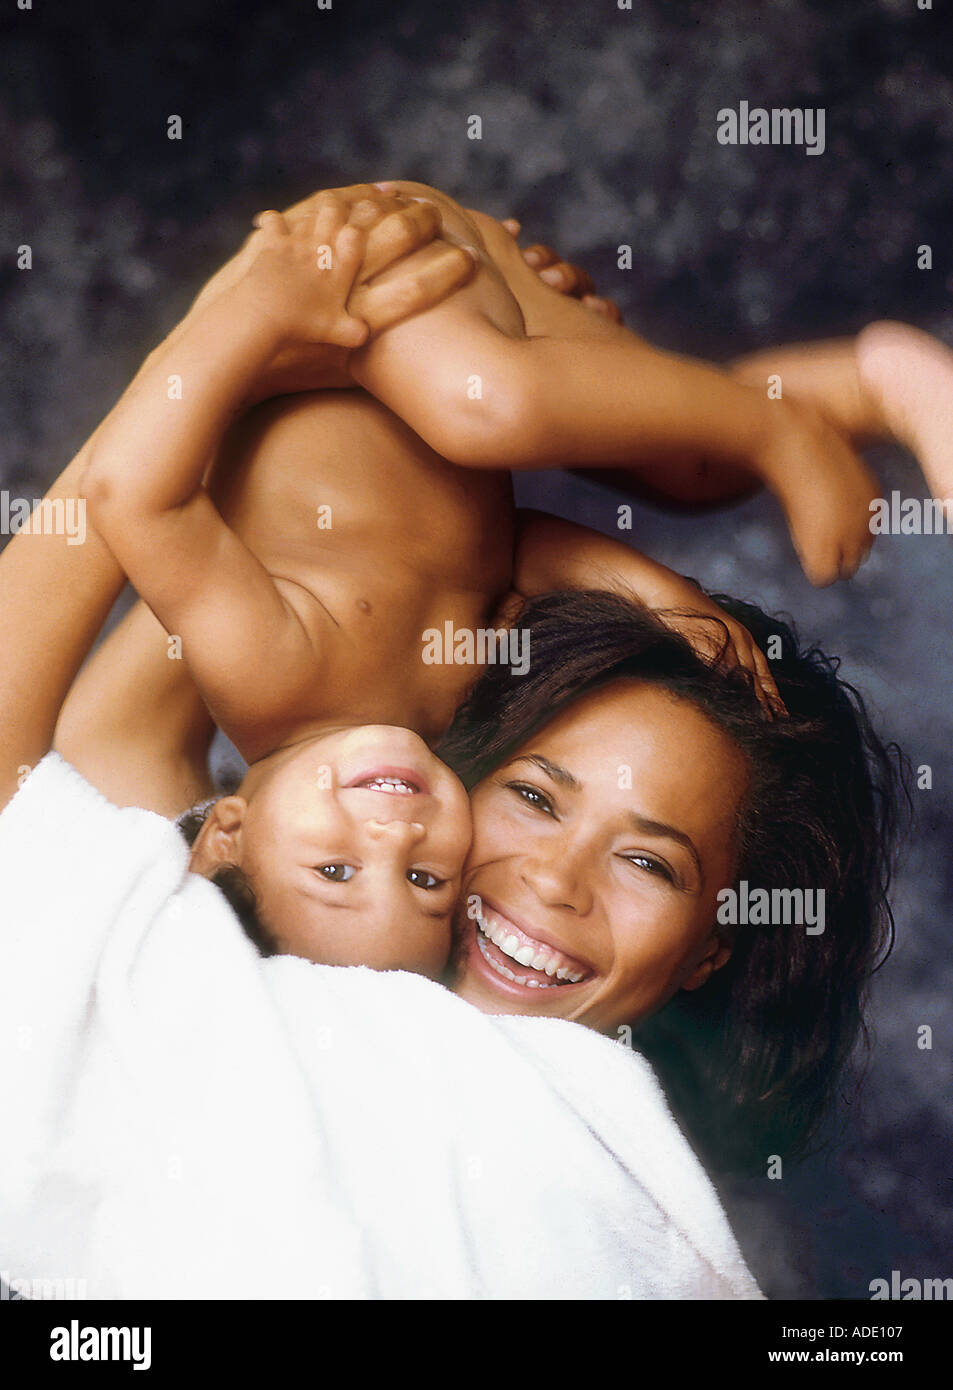 Afro American donna flipping baby capovolto Foto Stock